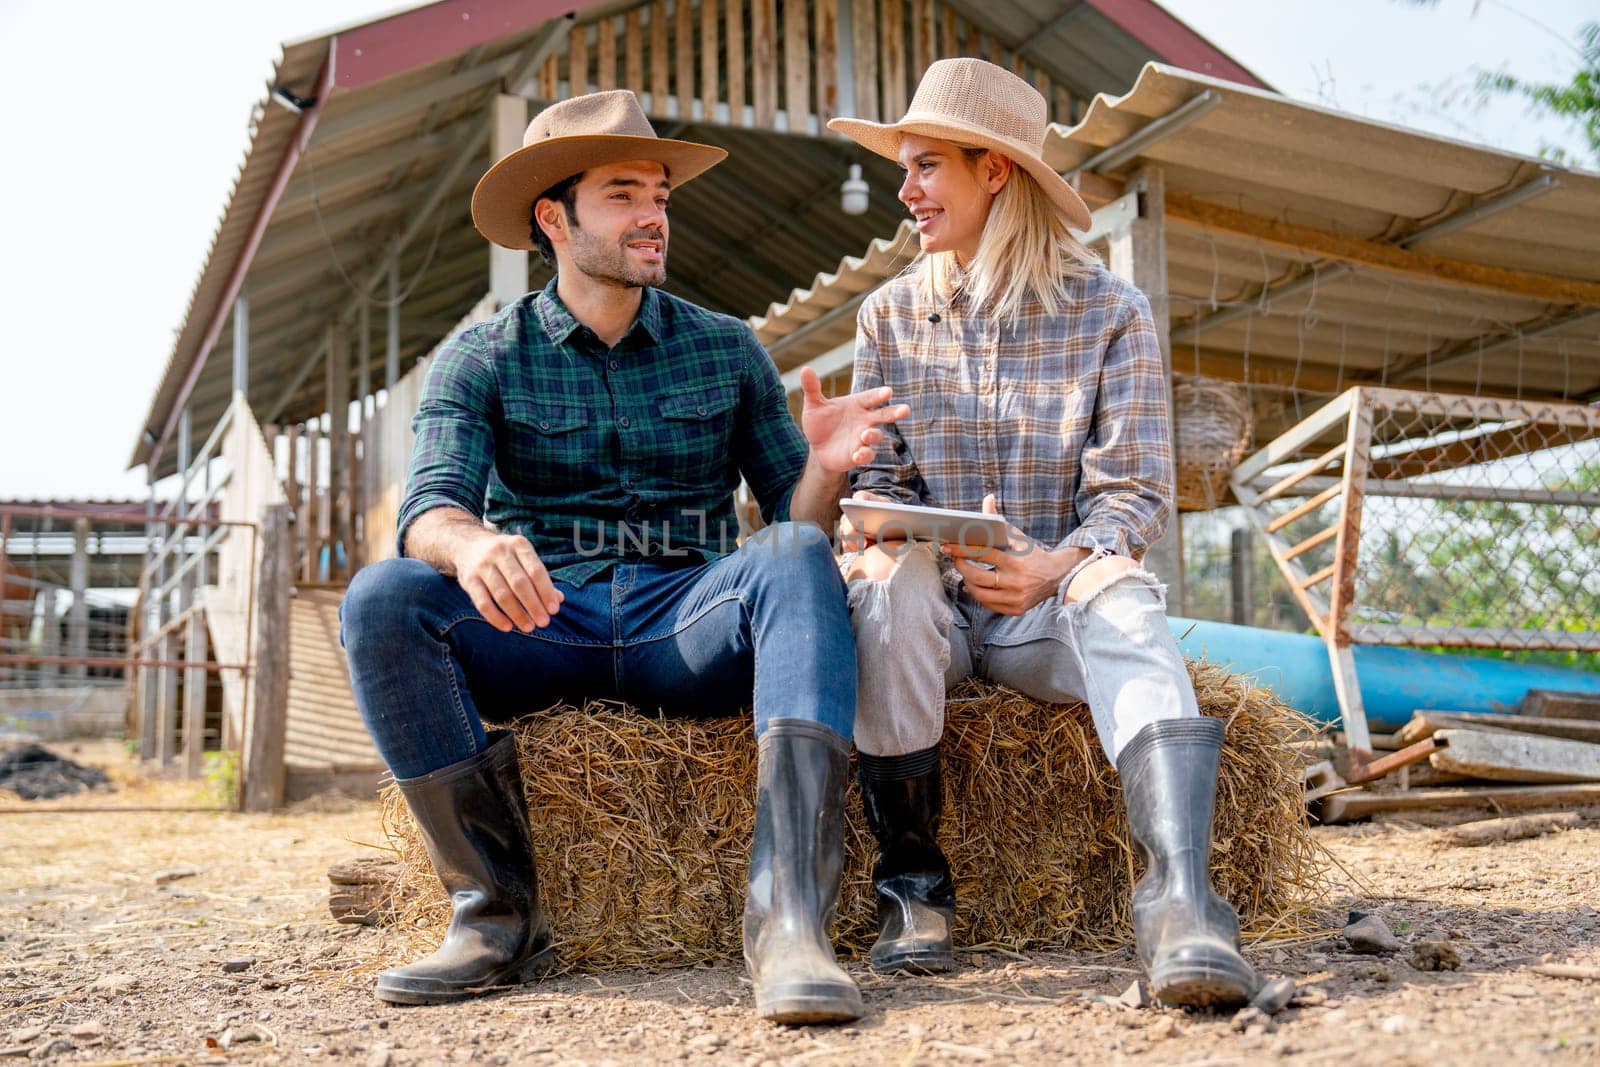 Caucasian man and woman farmers sit on straw and discuss about working with man explain the process and they look happy and relax after work in farm together with day light.